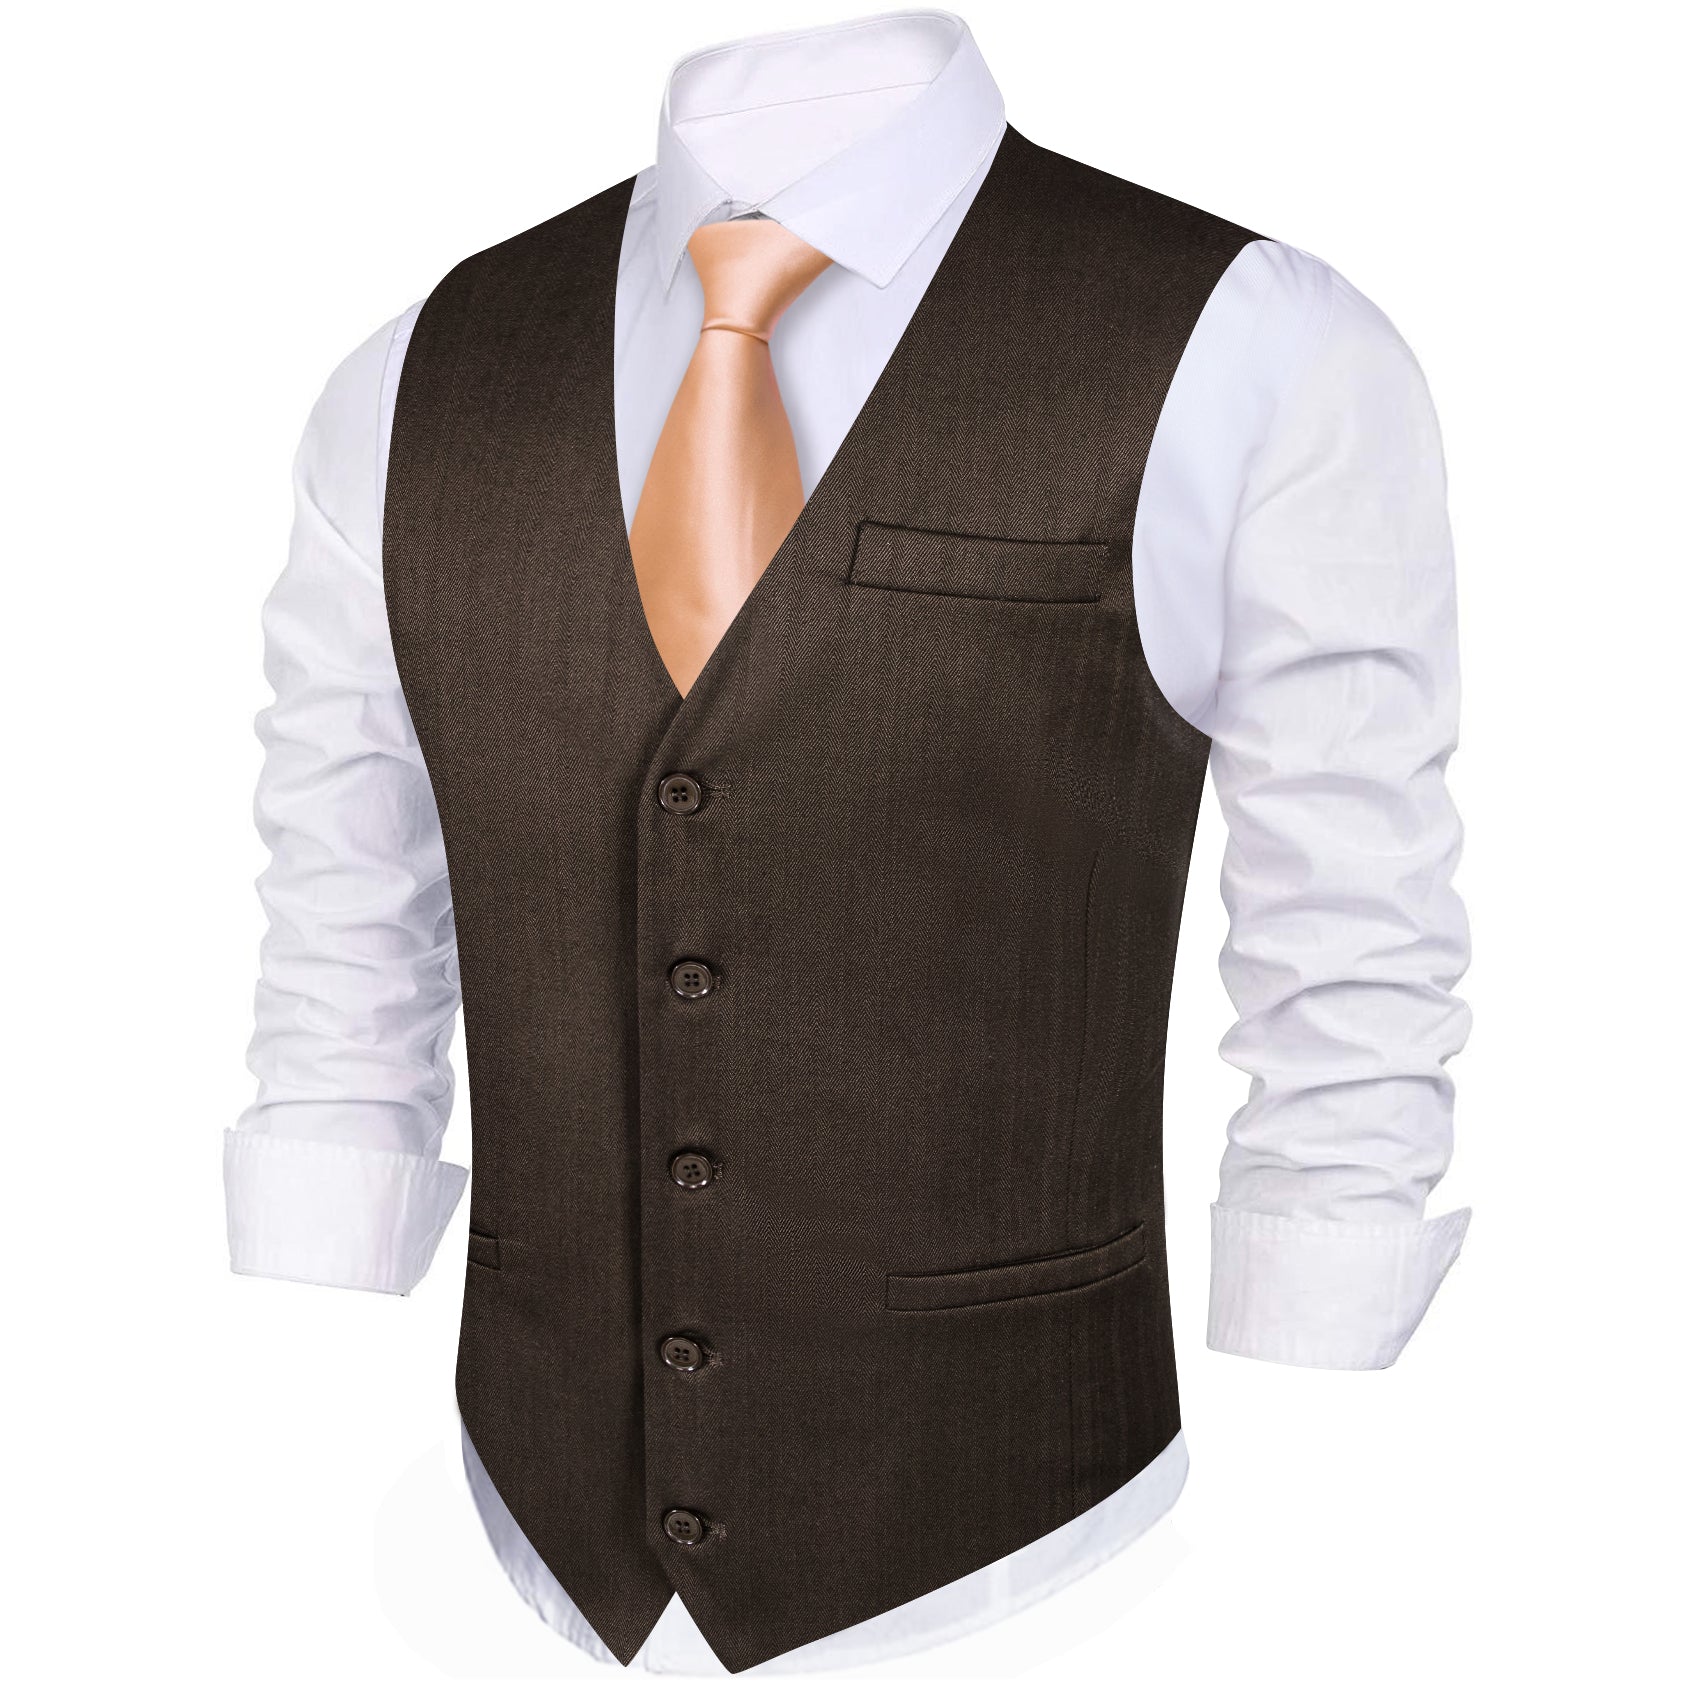 Barry.wang Luxury Bark Solid Vest Waistcoat For Business